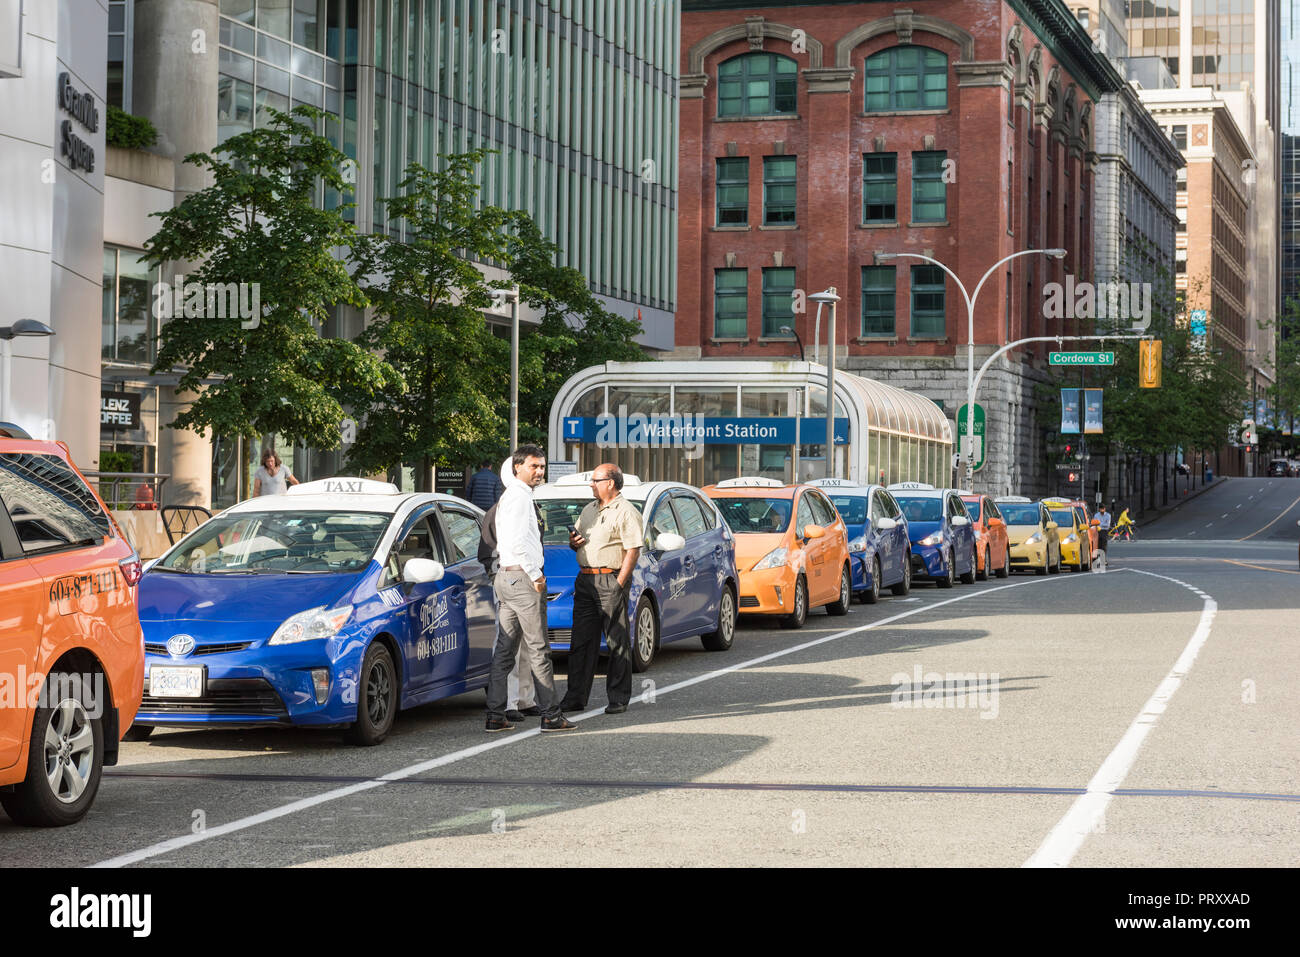 Queue of taxi cabs parked along the street curb waiting to be called for service as needed, Vancouver City. Stock Photo